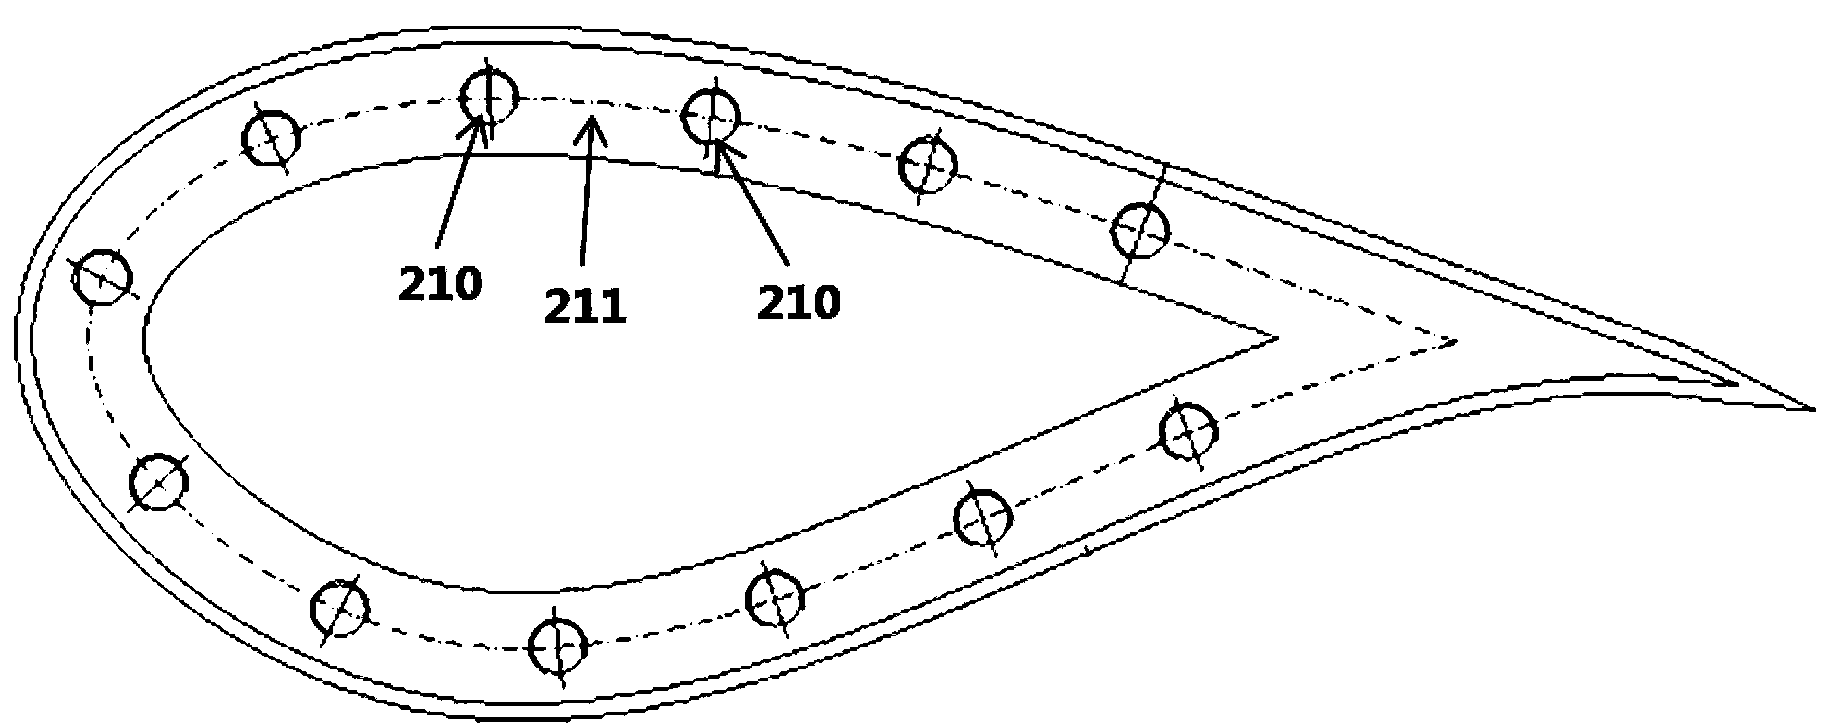 A method and device for integrally forming segmented blades